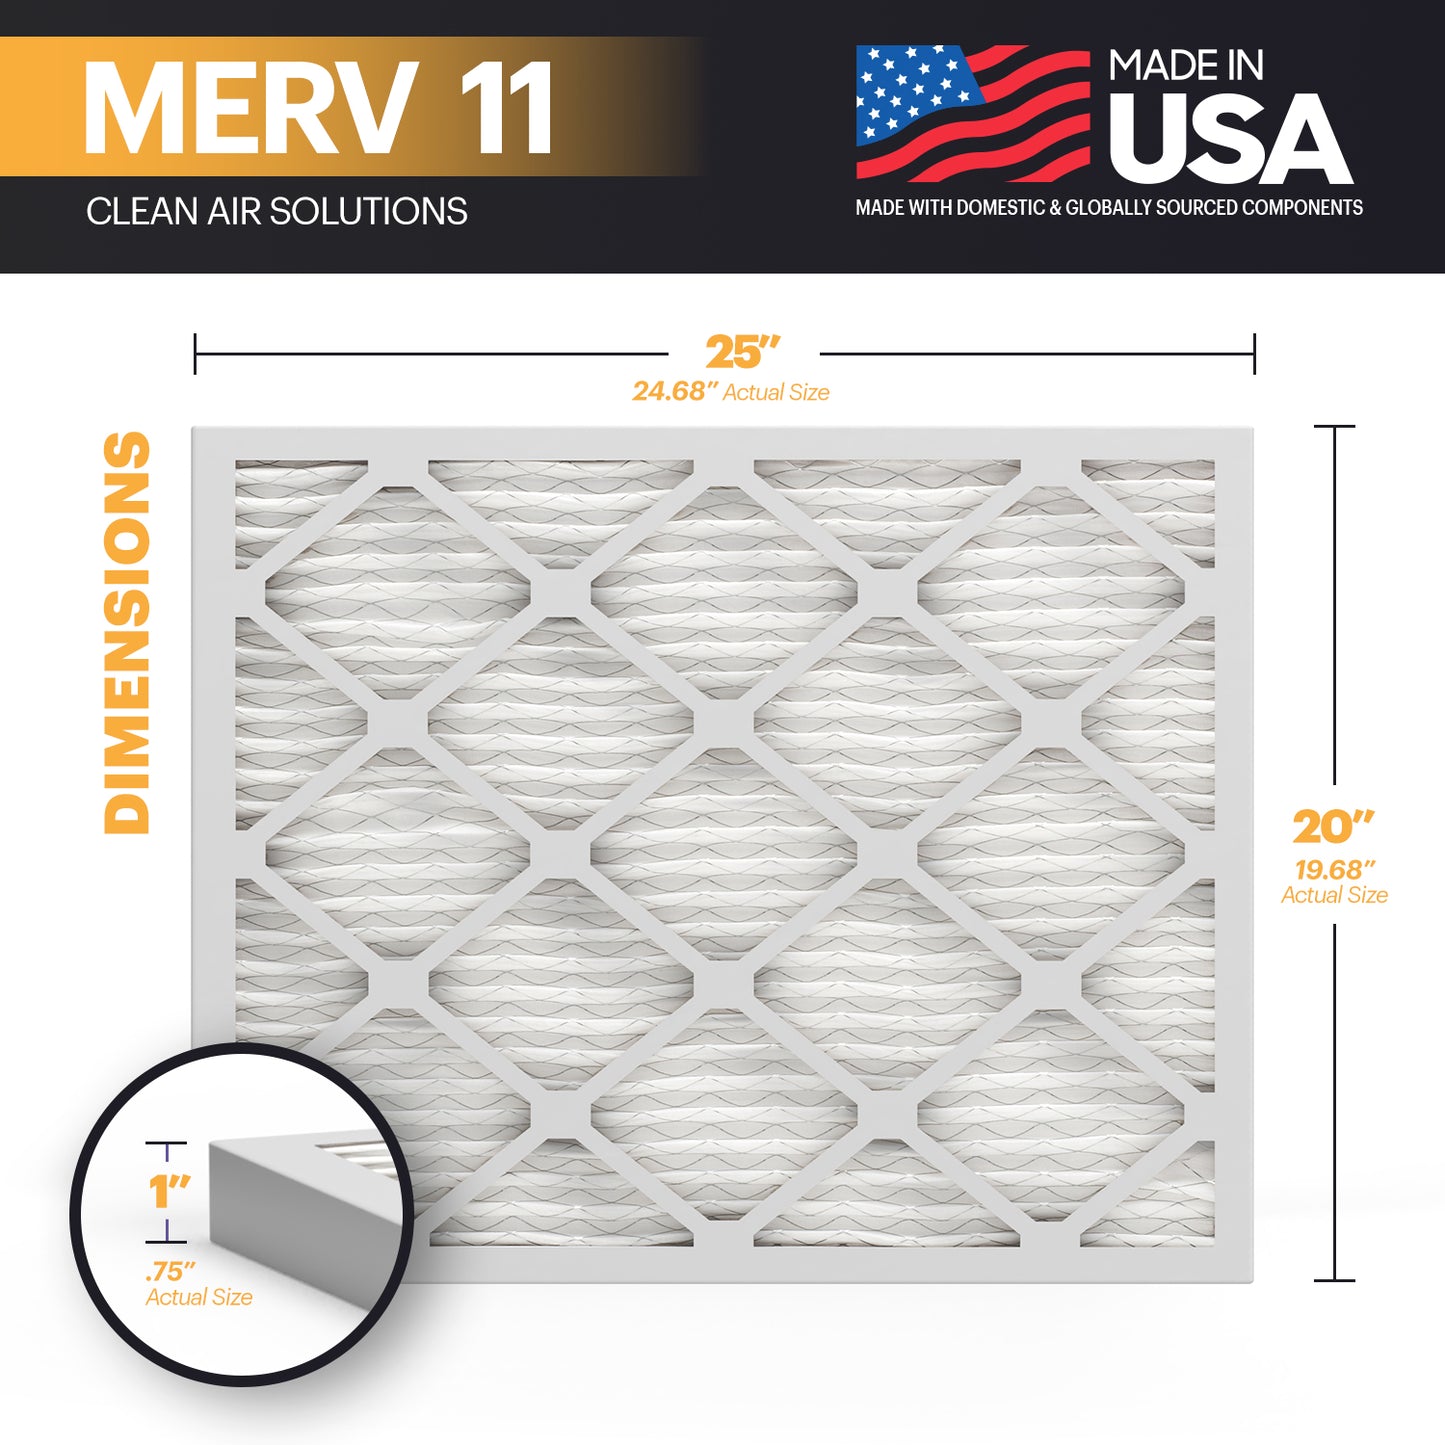 BNX TruFilter 20x25x1 Air Filter MERV 11 (6-Pack) - MADE IN USA - Allergen Defense Electrostatic Pleated Air Conditioner HVAC AC Furnace Filters for Allergies, Dust, Pet, Smoke, Allergy MPR 1200 FPR 7